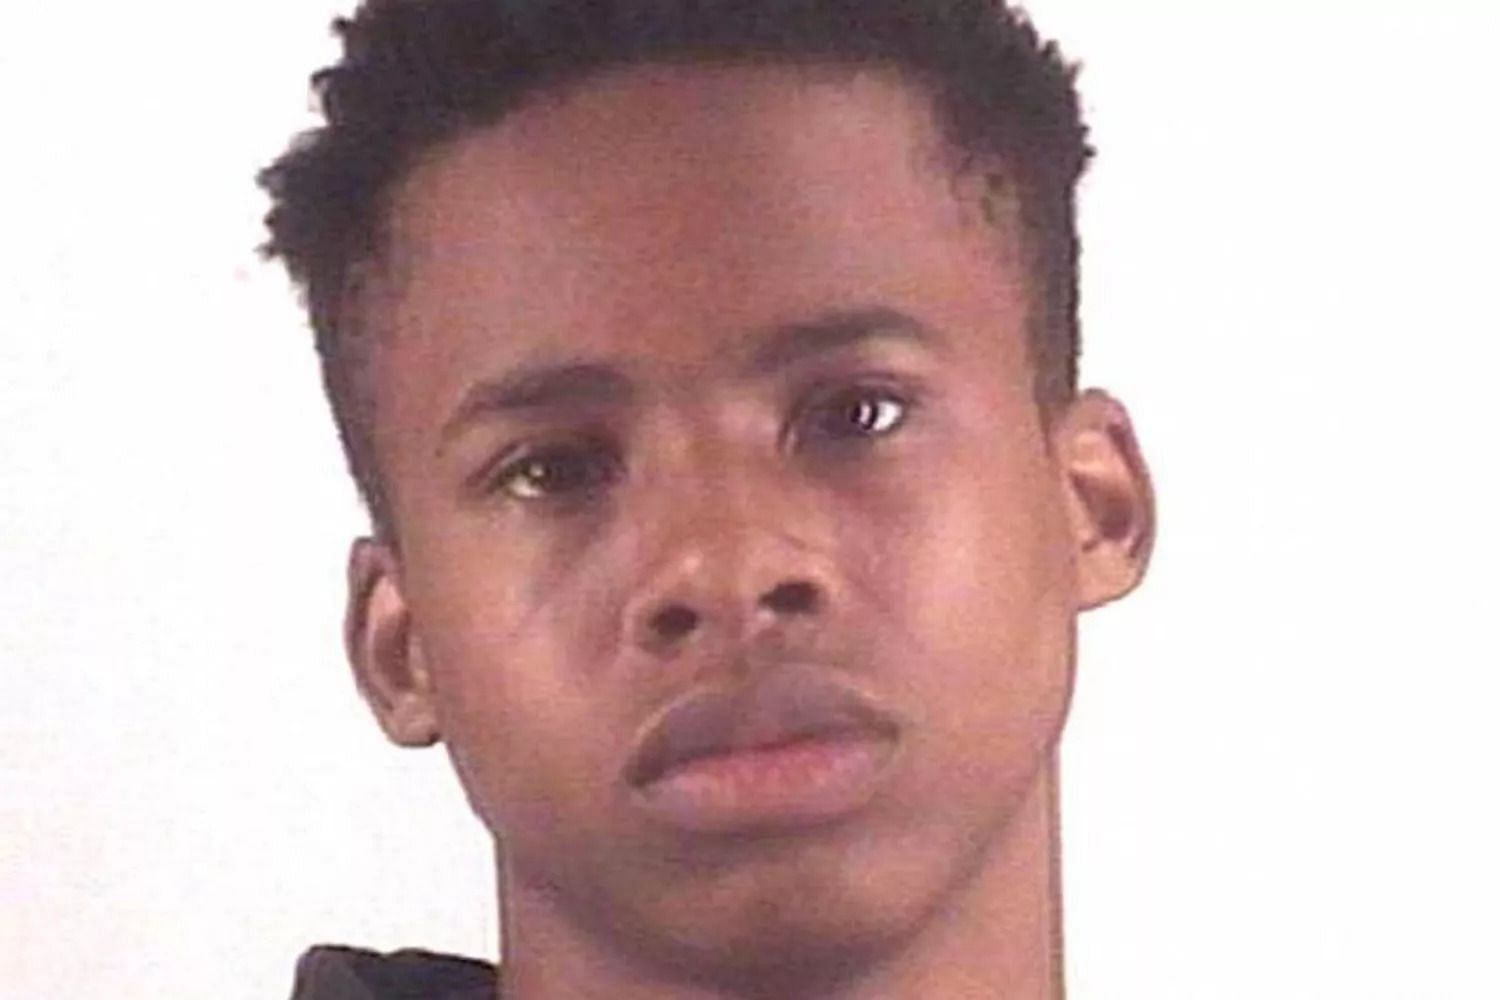 The rapper now faces 55 years in prison (Image via Tarrant County Sheriff&rsquo;s Office)